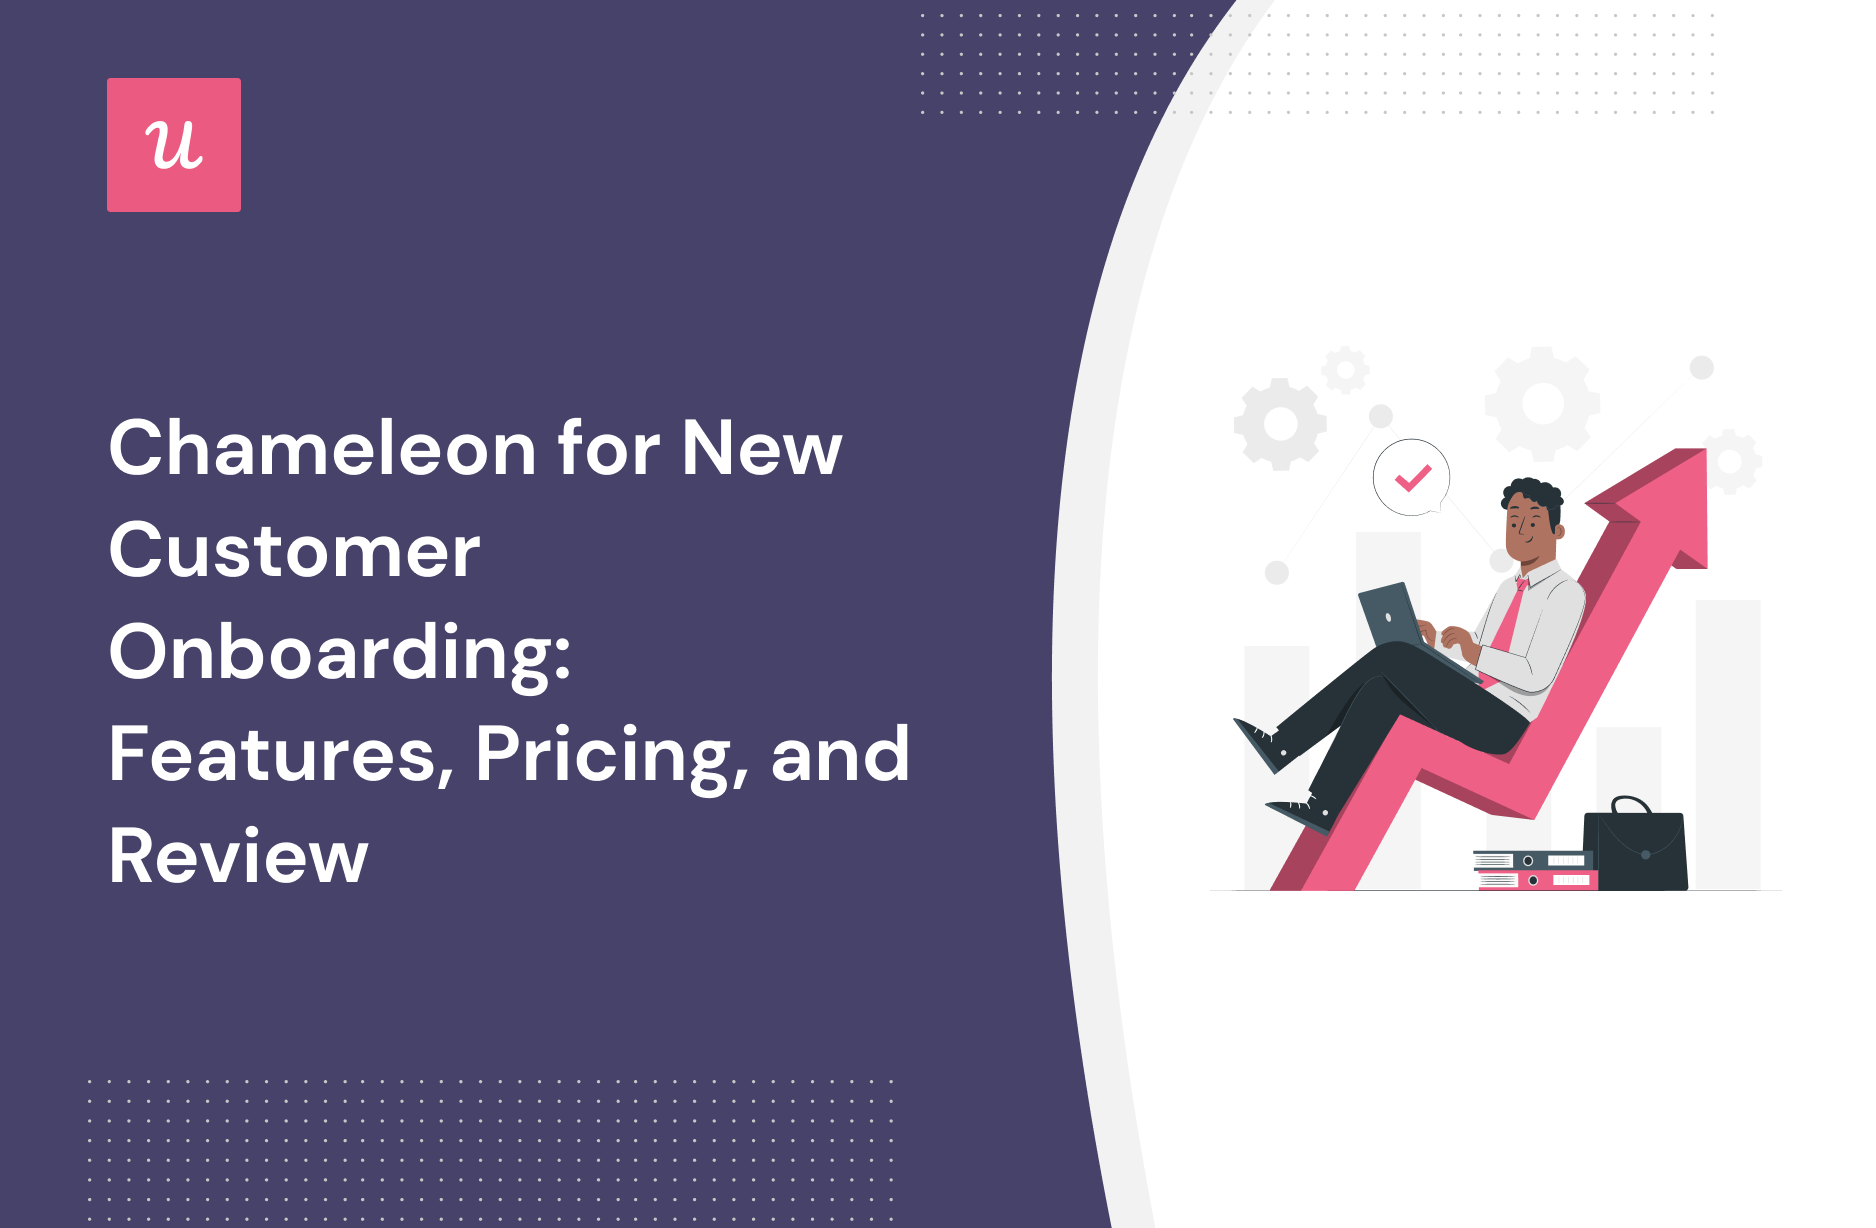 Chameleon for new customer onboarding: Features, Pricing, and Review